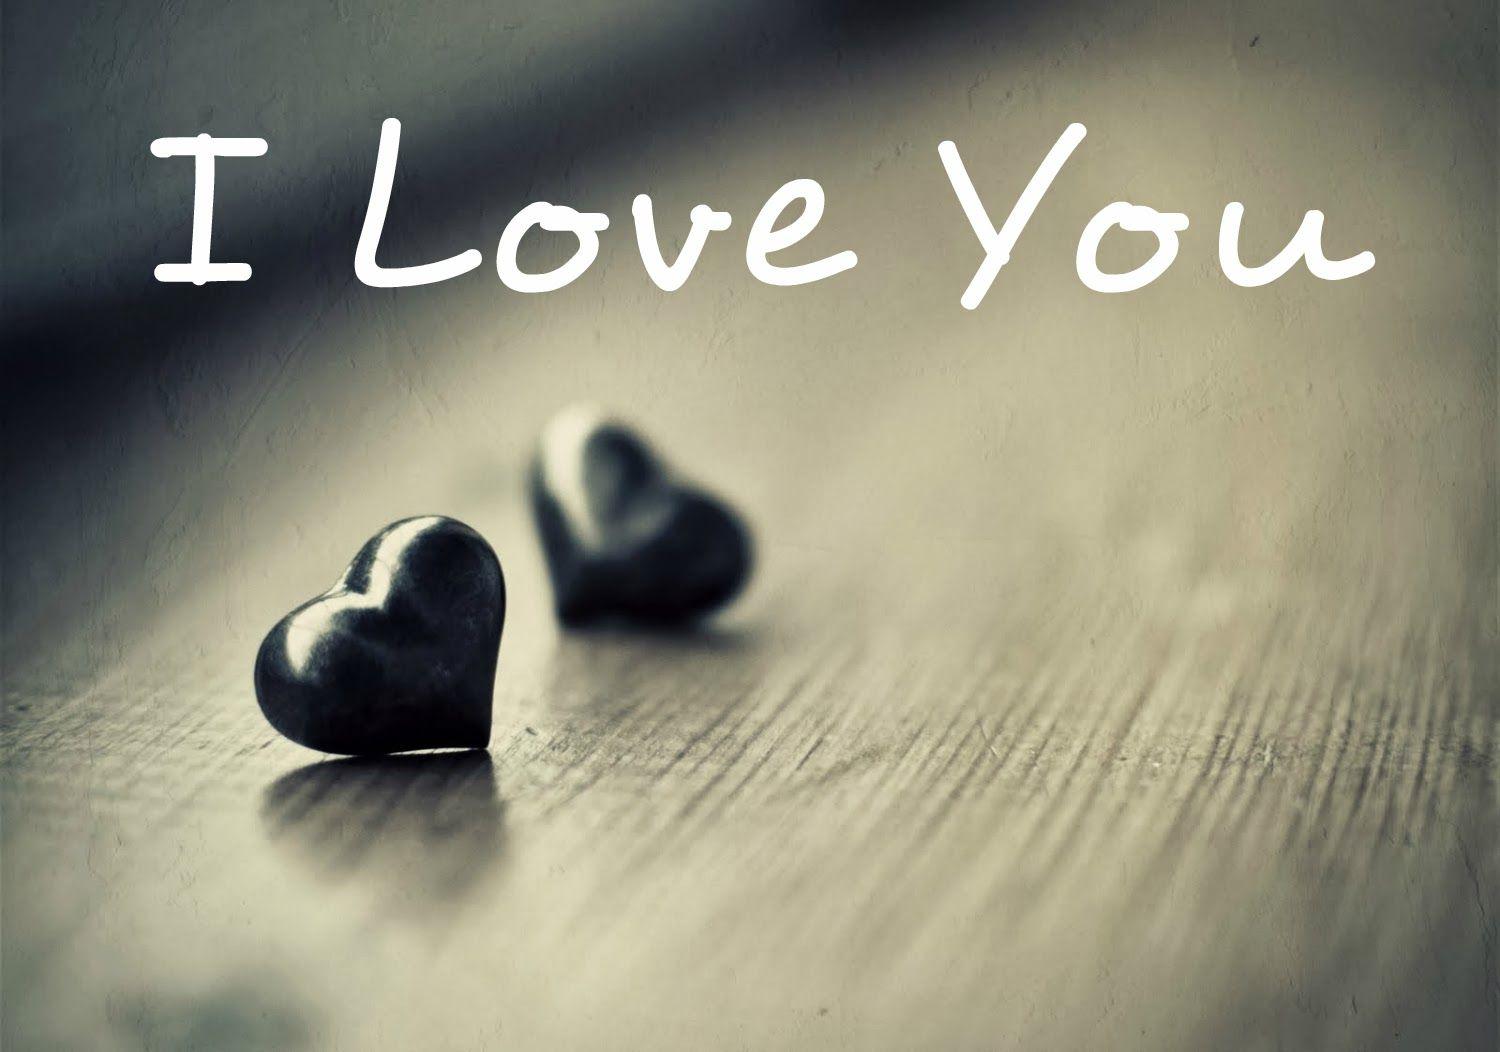 I Love You HD Image Wallpaper. I Love You Free Download Image